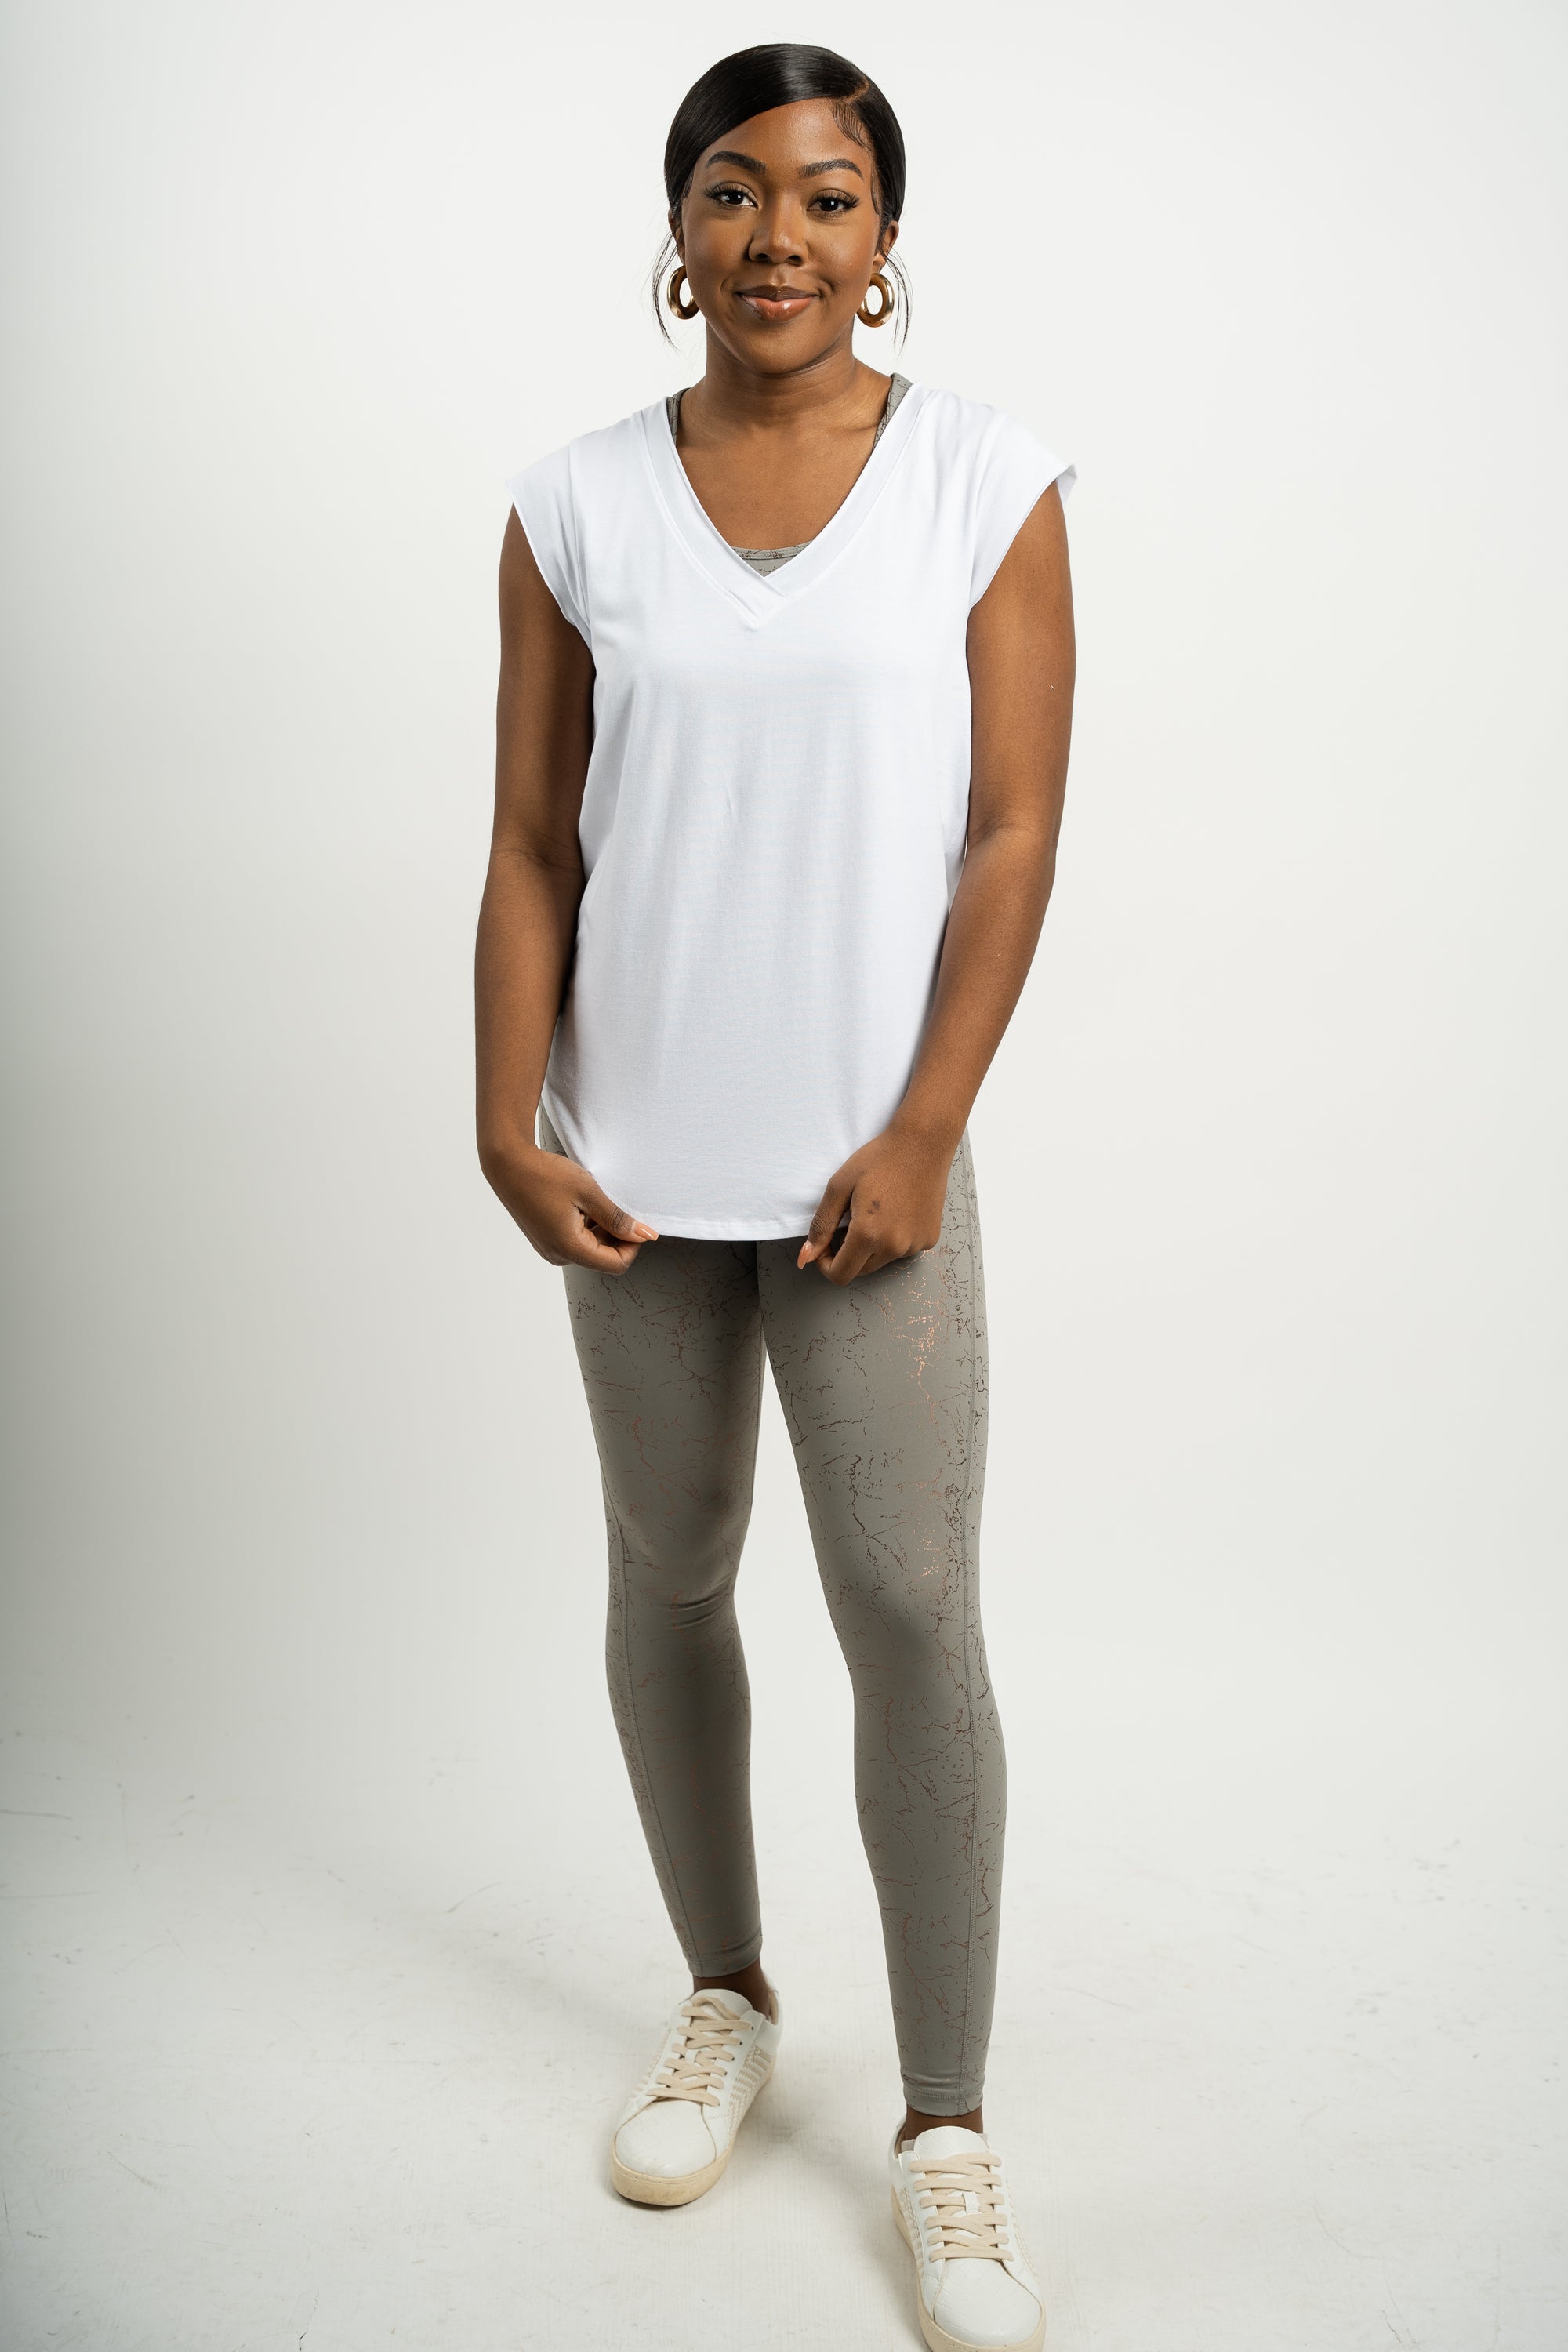 V tee with curved hem white - Trendy Sports tops - Fashion Activewear at Lush Fashion Lounge Boutique in Oklahoma City